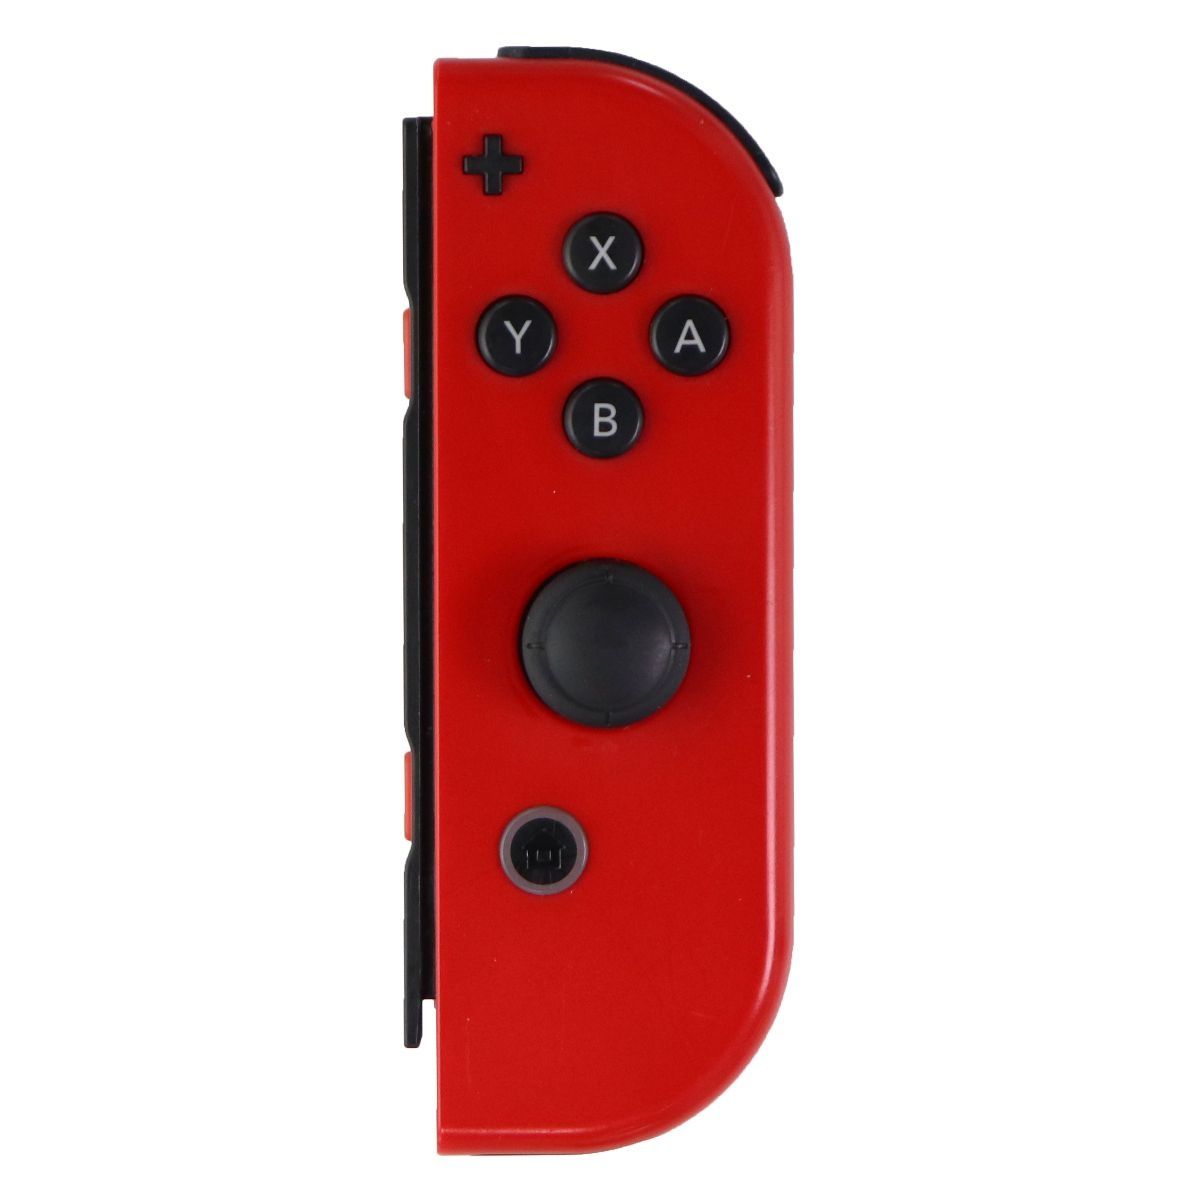 Nintendo RIGHT Joy-Con Controller for Switch Console - Mario Red (Mario Edition) Gaming/Console - Controllers & Attachments Nintendo    - Simple Cell Bulk Wholesale Pricing - USA Seller